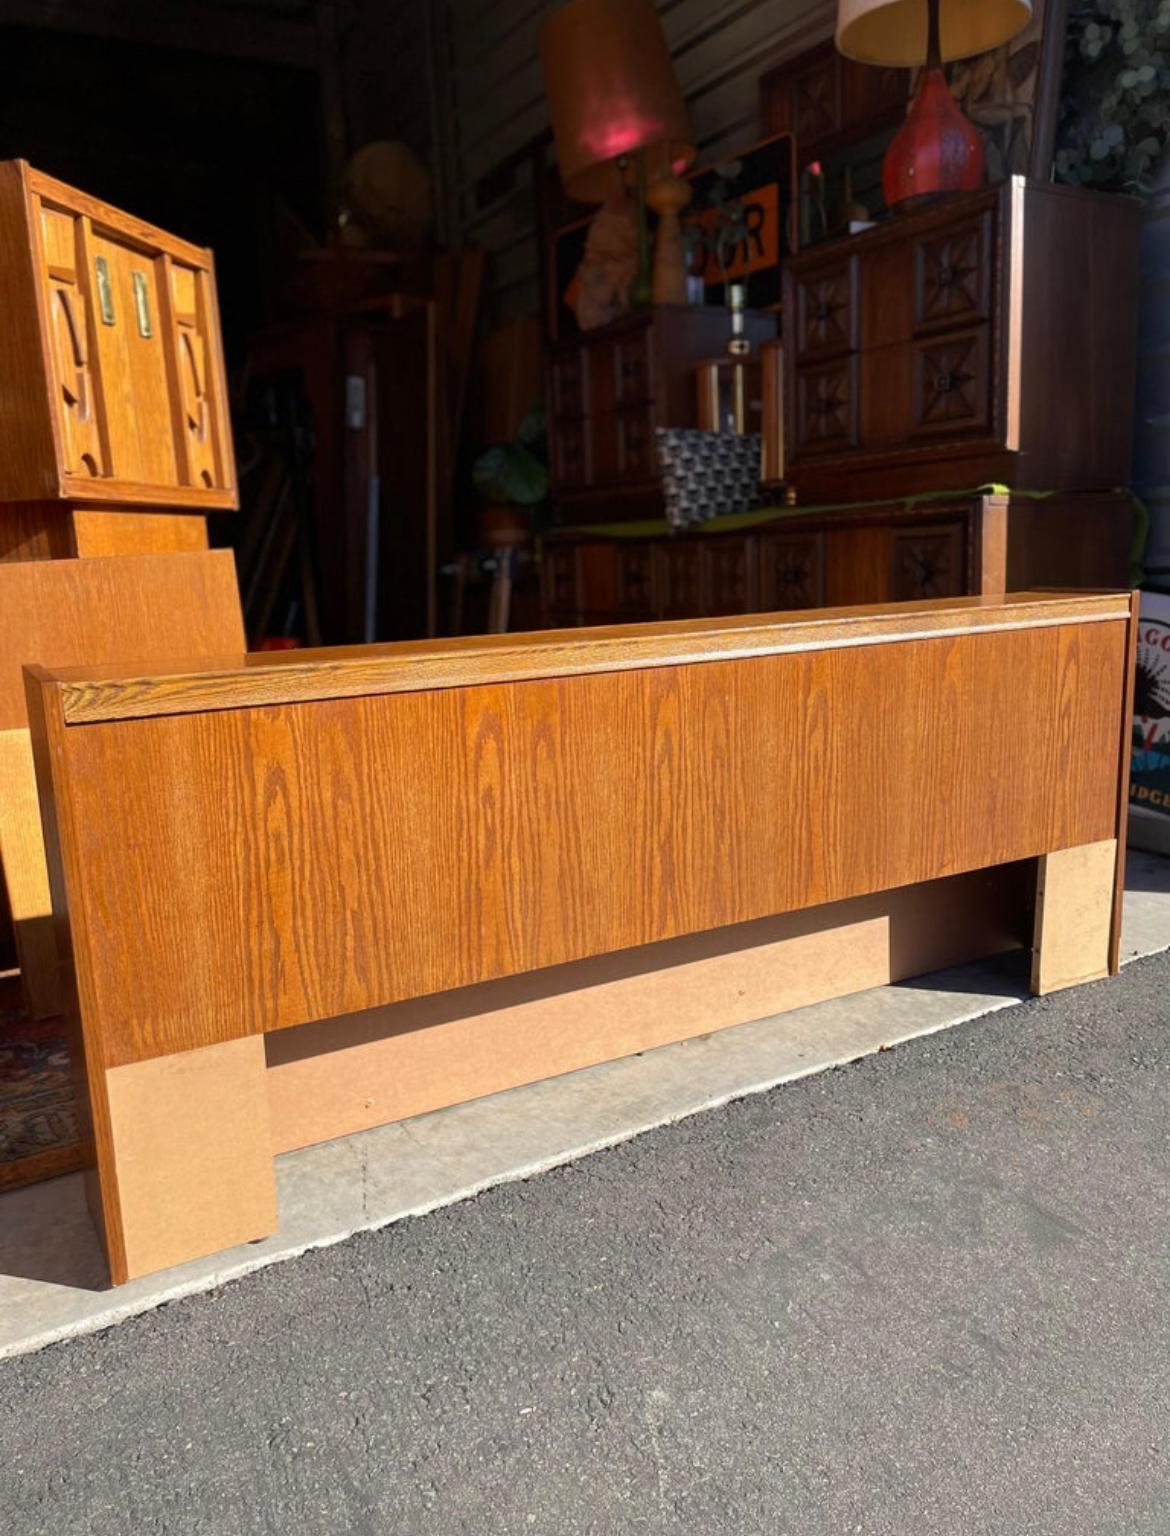 Finding this tiki brutalist bedroom set as a COMPLETE SET in such great vintage condition is a rarity! The details on the pieces are truly amazing. Smooth sliding drawers and tons of storage space. Utilize the Tallboy in multiple ways. This set will